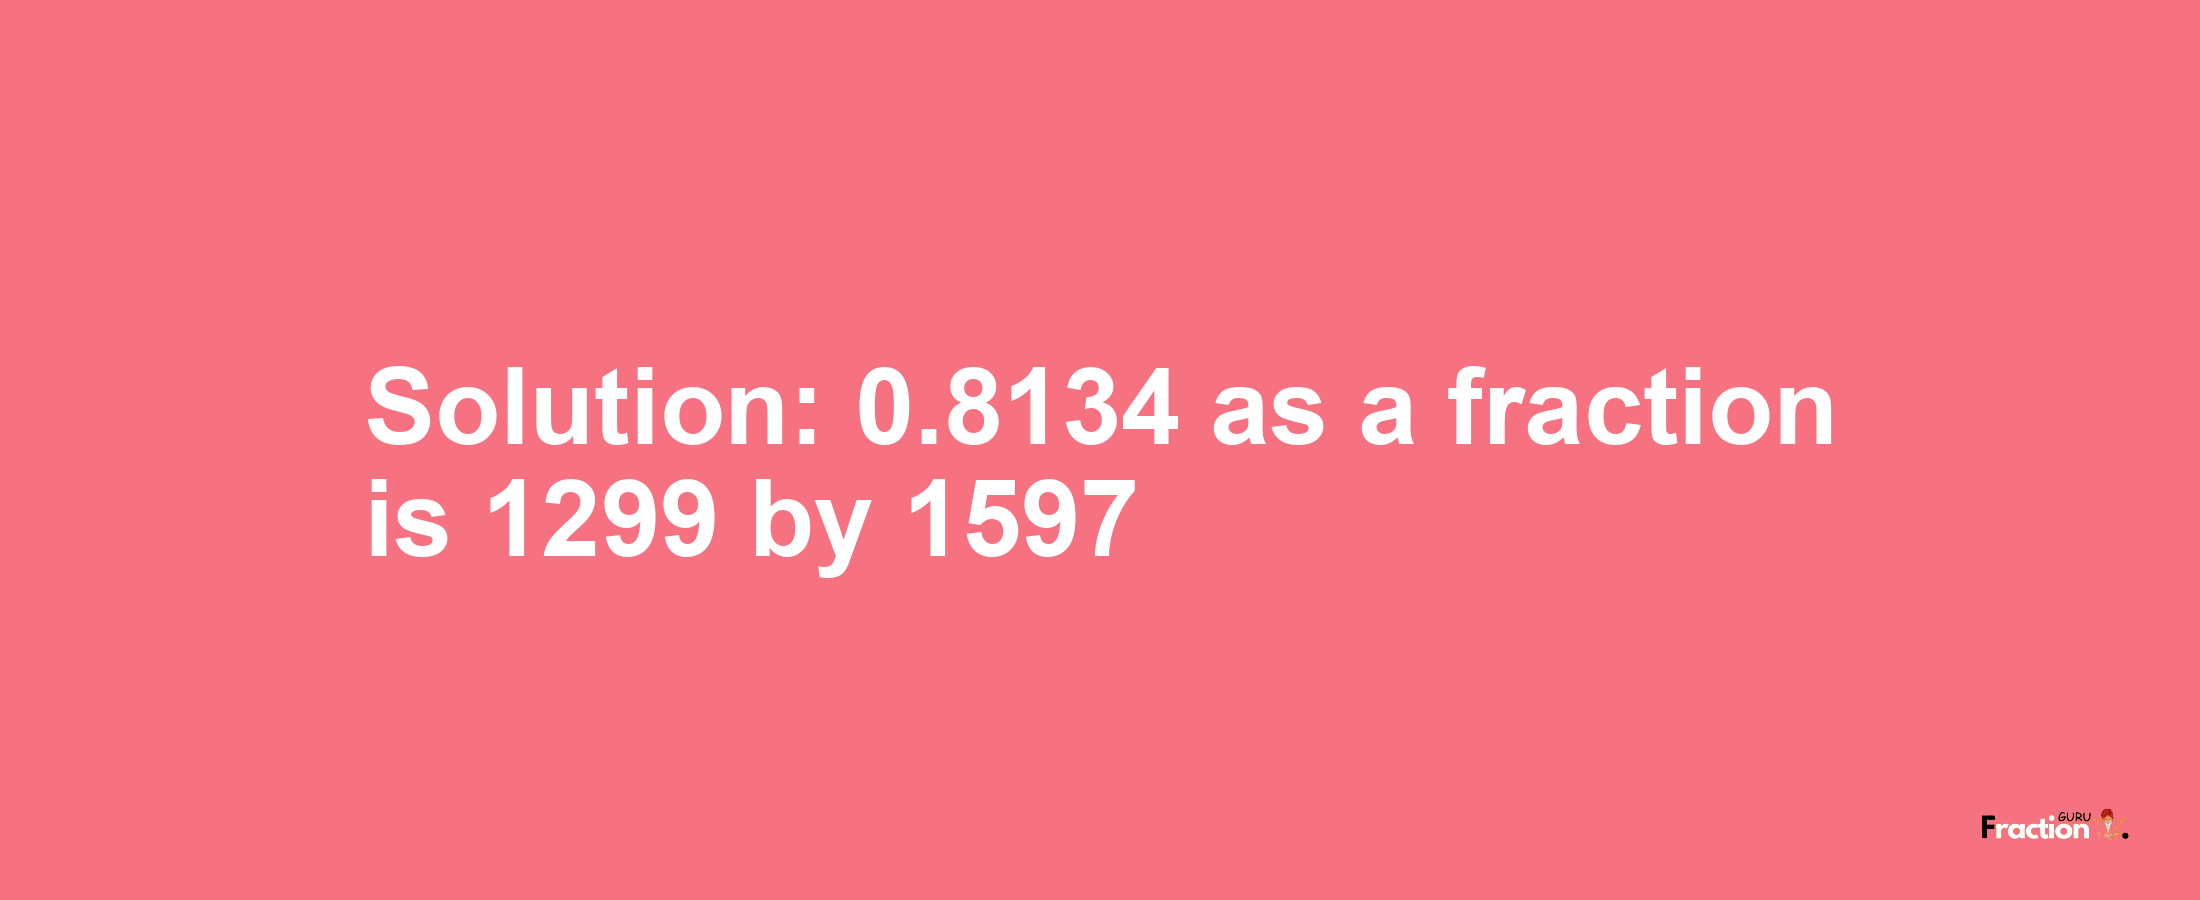 Solution:0.8134 as a fraction is 1299/1597